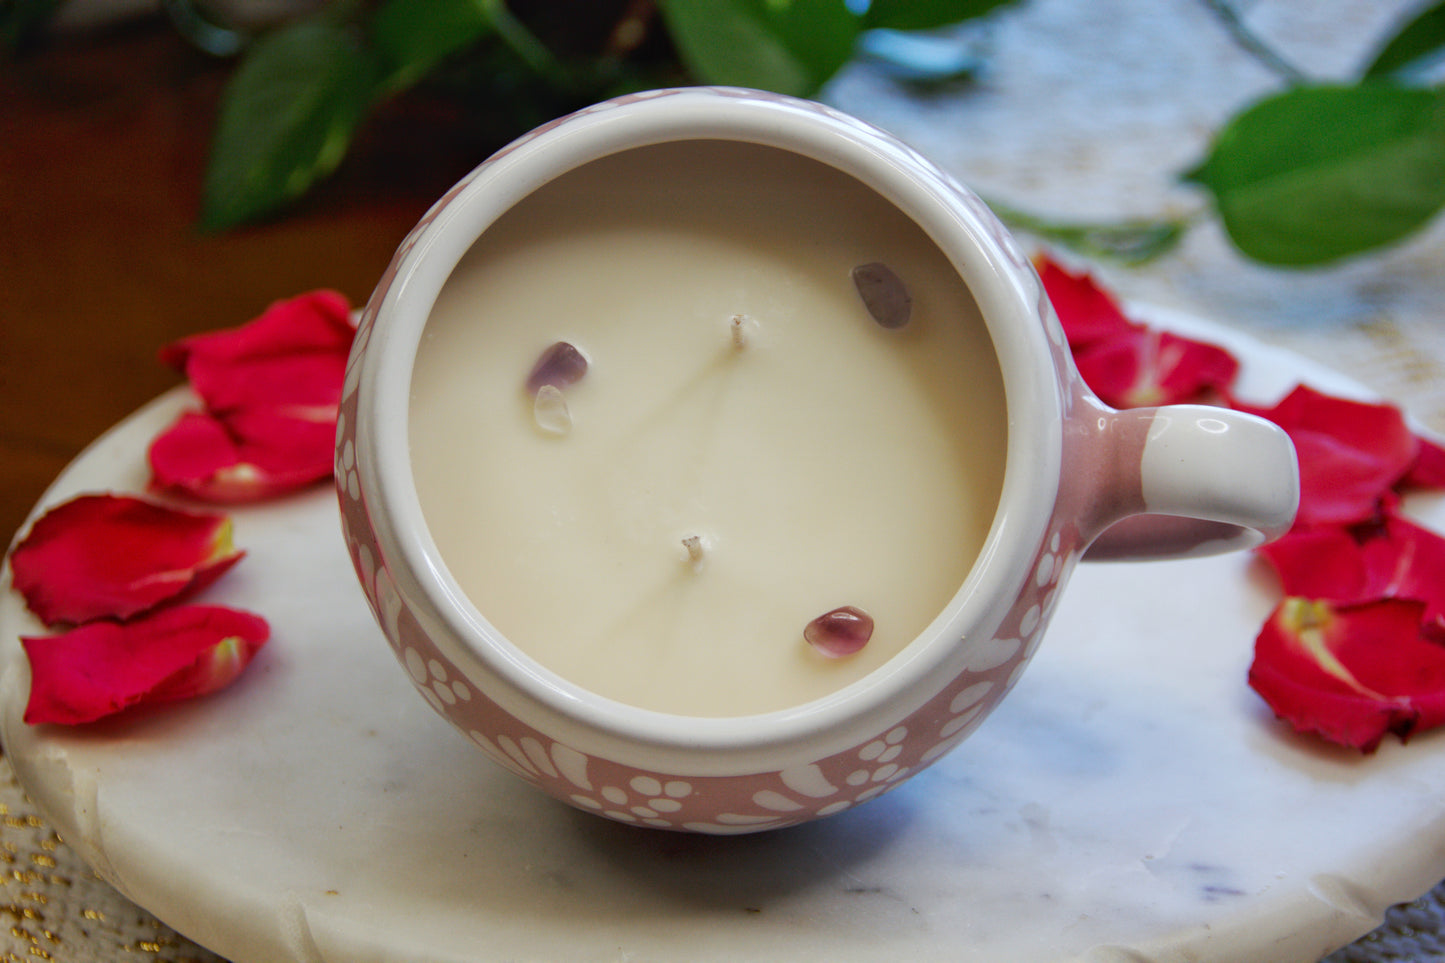 top view of an Artisanal candle in a beautiful pink cup with handle, handmade white paint strokes design. Handcrafted by Artisan in Puebla, Mexico. 100% All Natural Soy Candle. Reuse the talavera as home decor or storage.